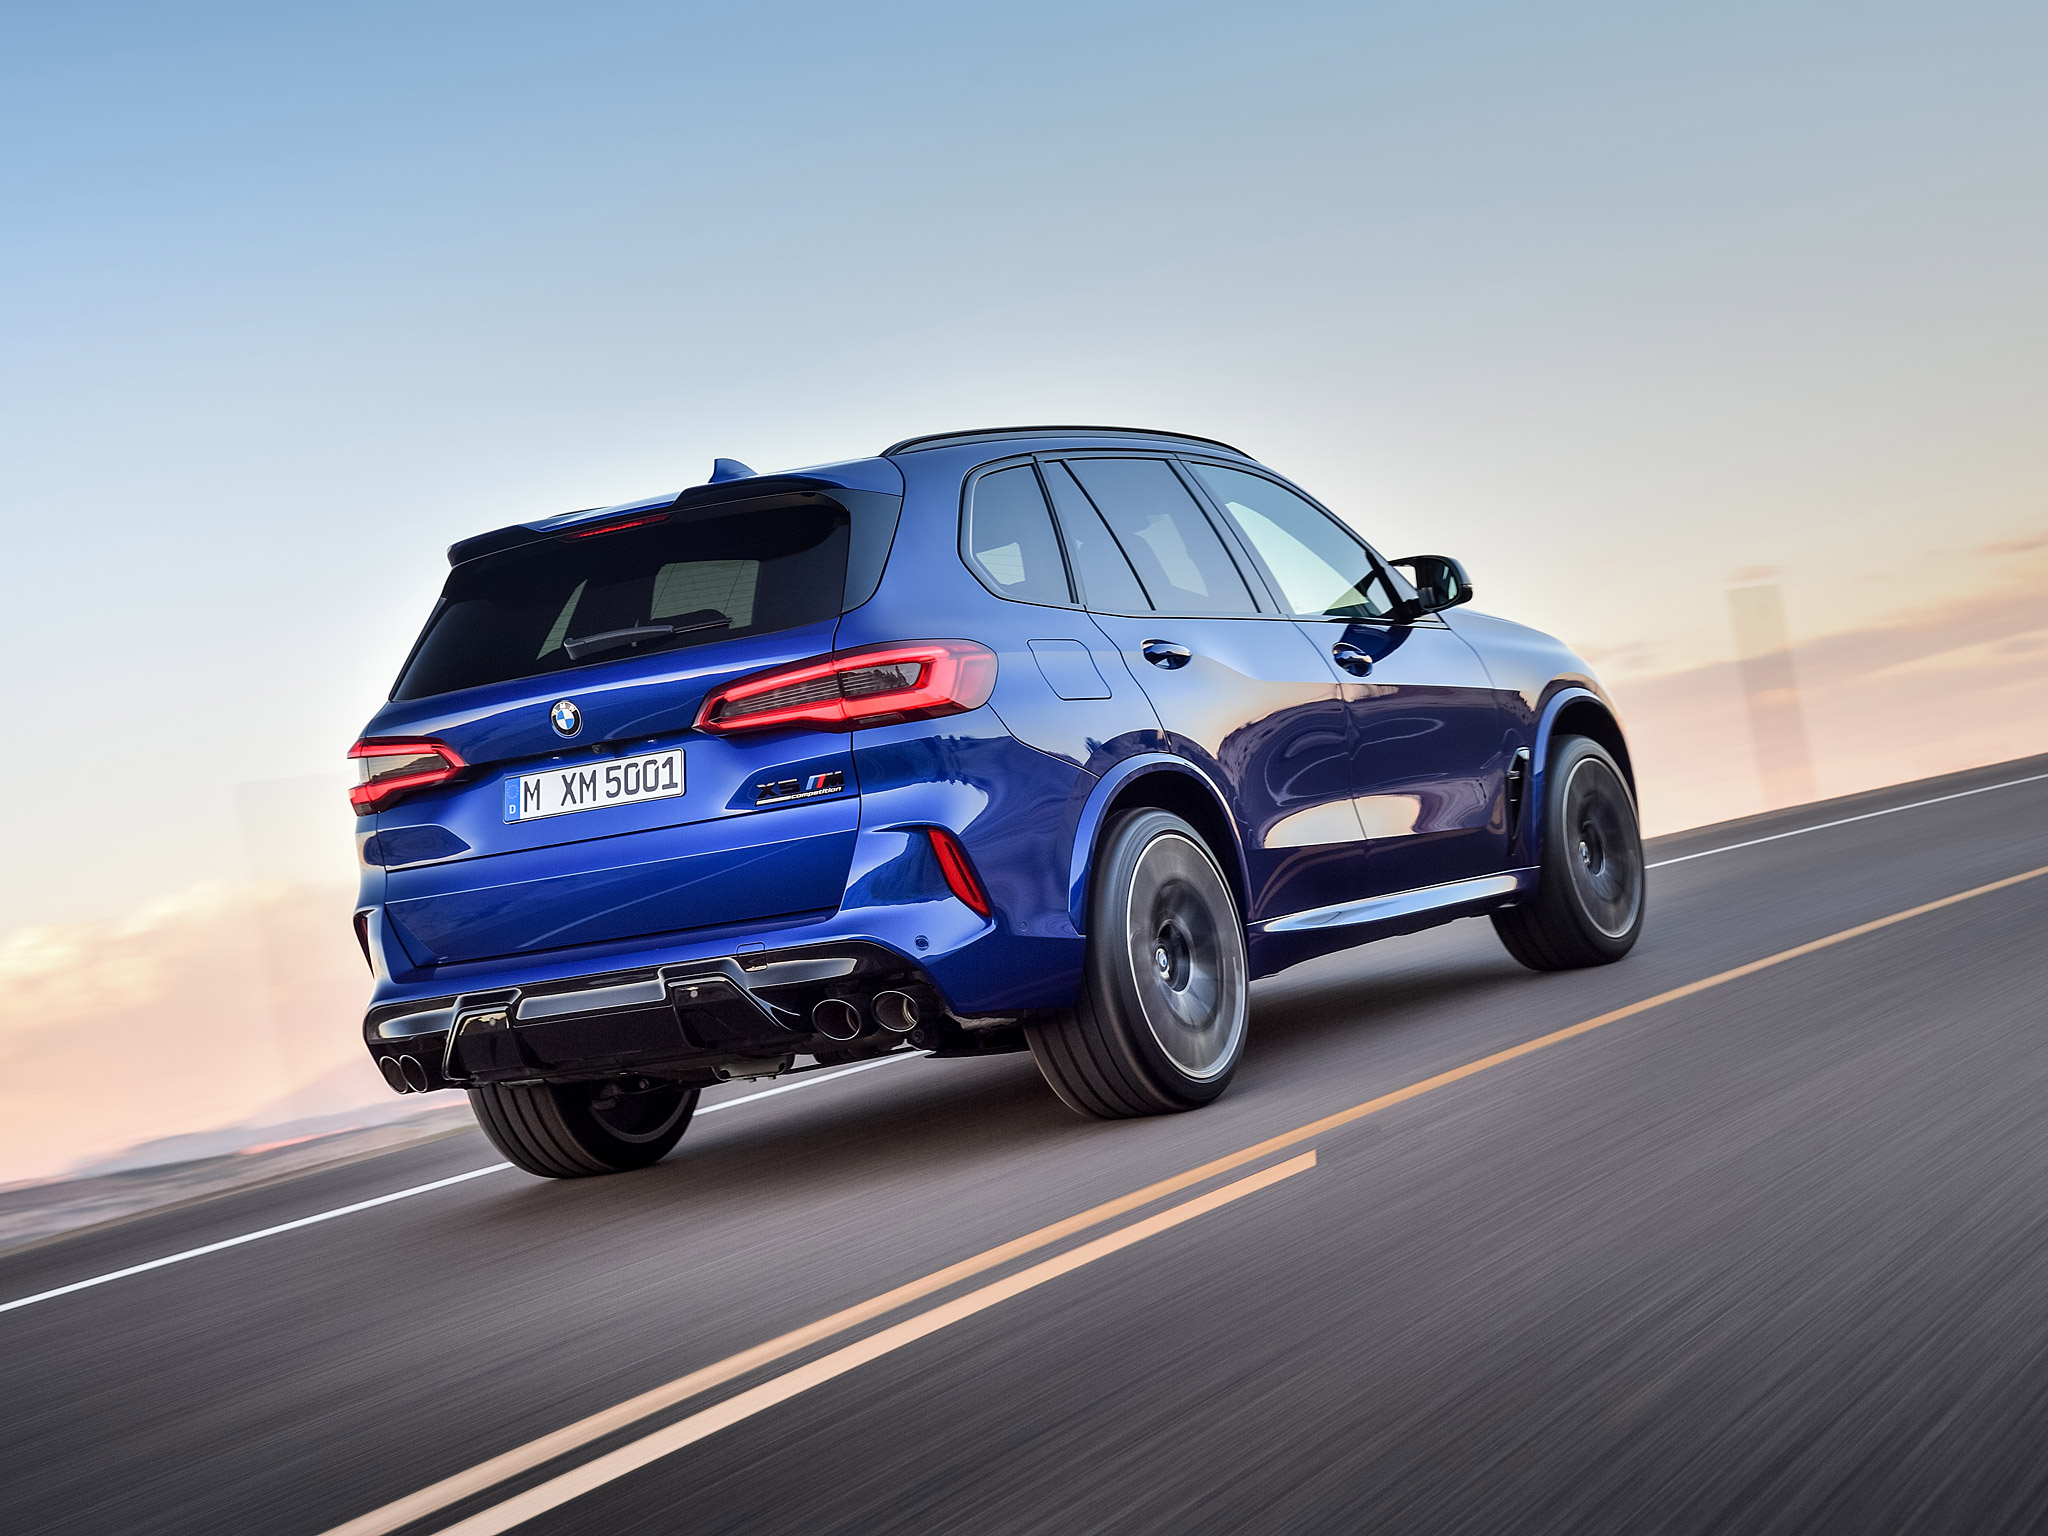  2020 BMW X5 M Competition Wallpaper.